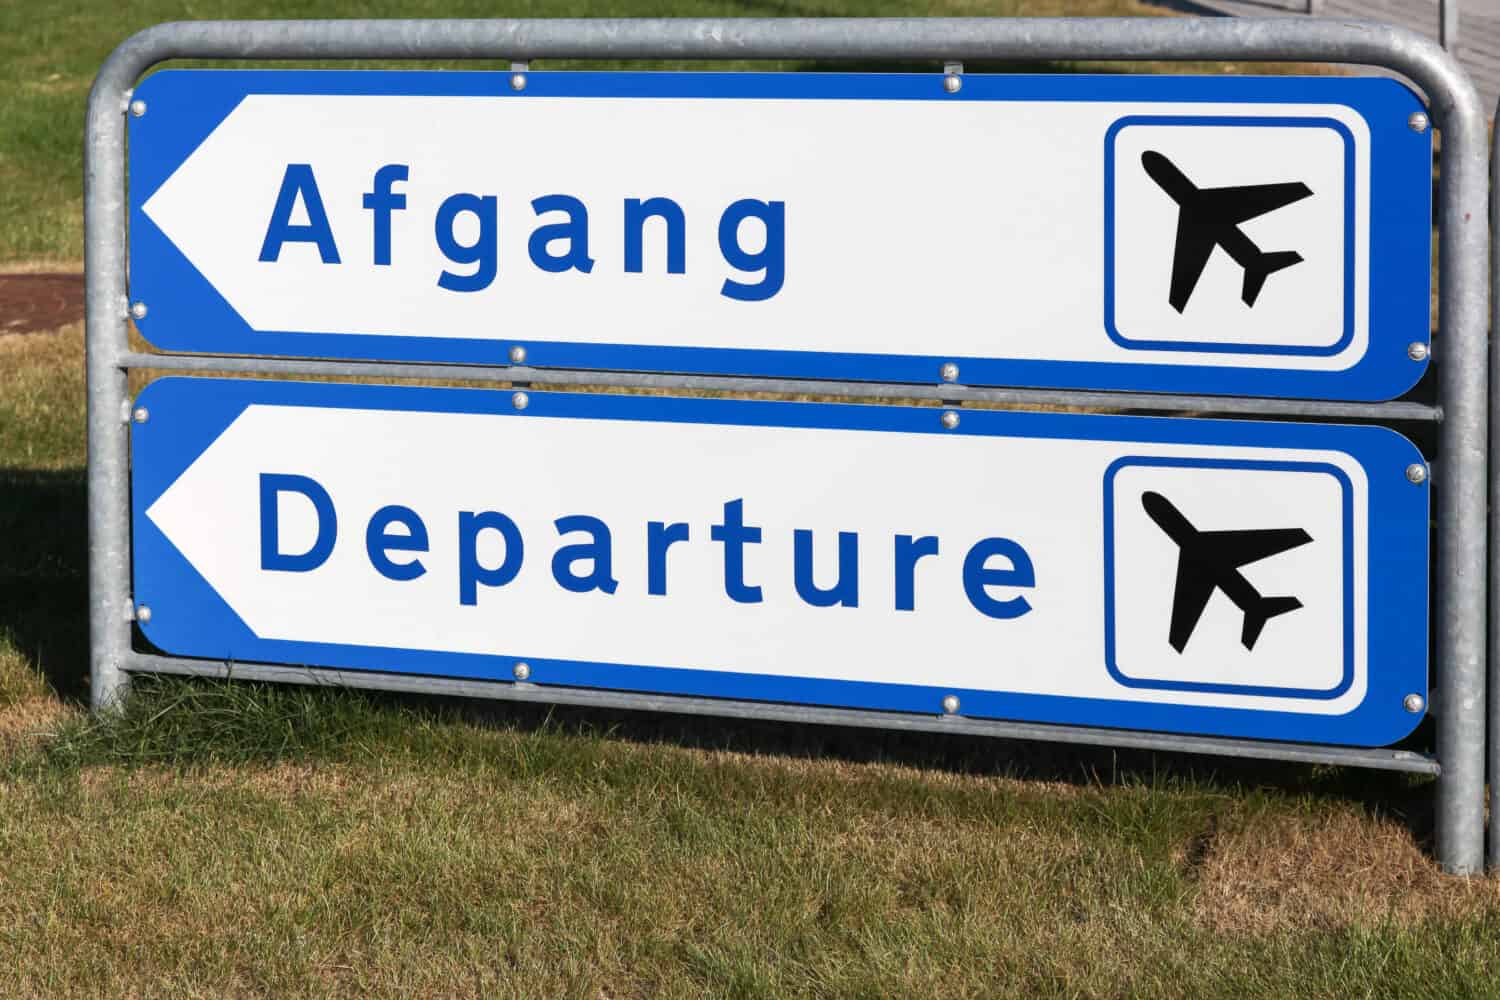 Departure terminal road sign in Danish and English languages